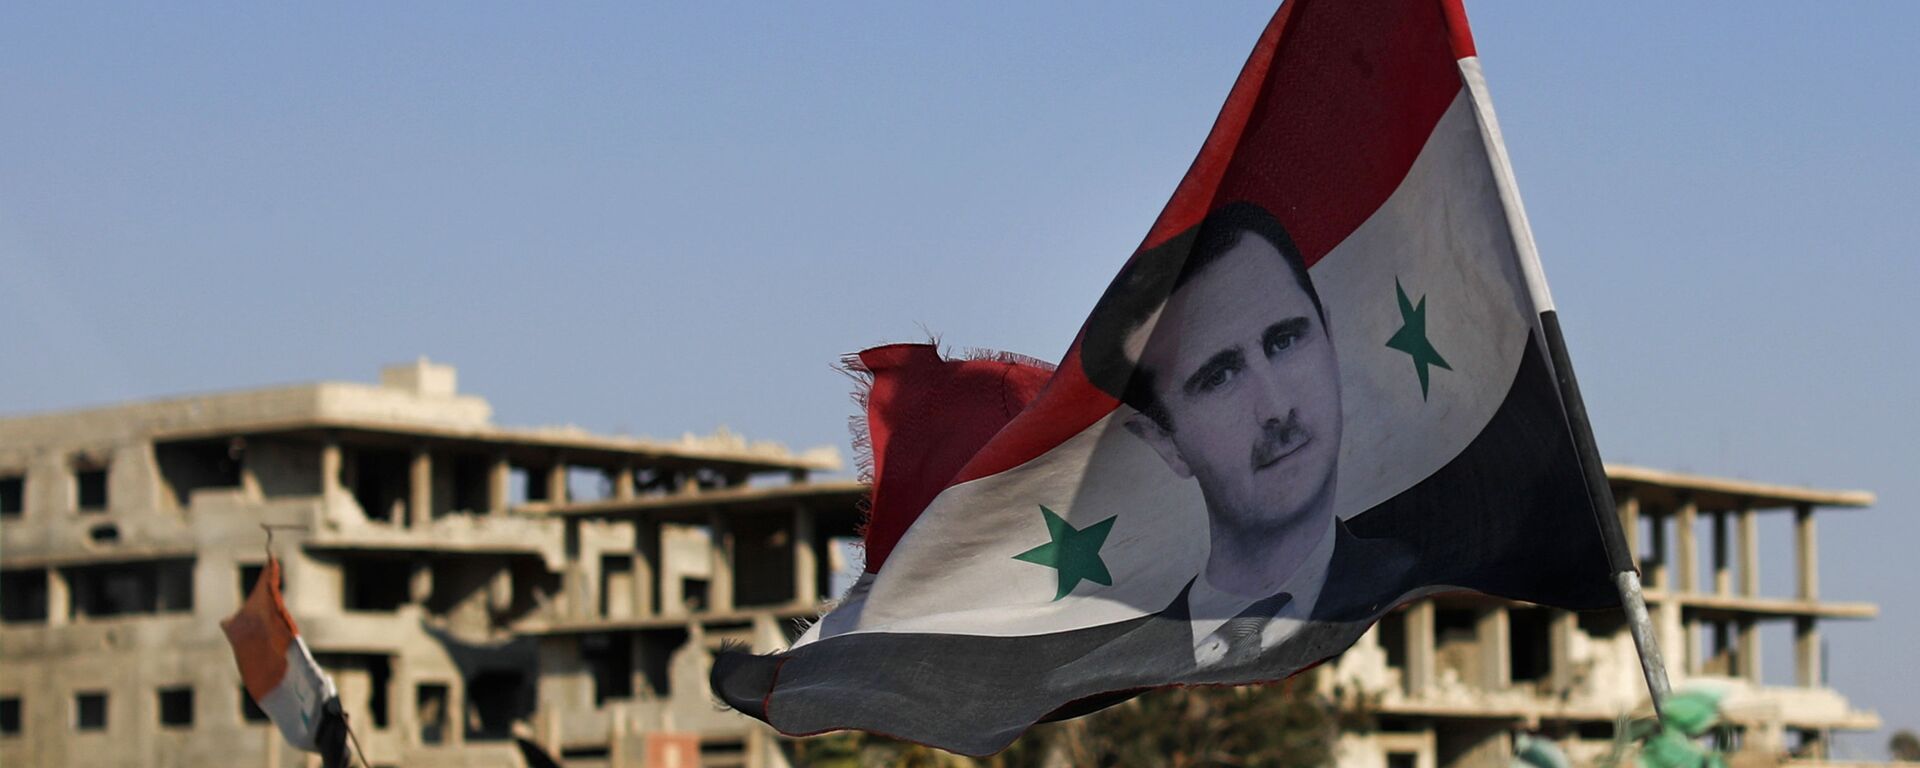 In this July 15, 2018 file photo, a Syrian national flag with a picture of Syrian President Bashar Assad flies at an Army check point, in the town of Douma in the eastern Ghouta region, near Damascus, Syria. - Sputnik International, 1920, 15.03.2021